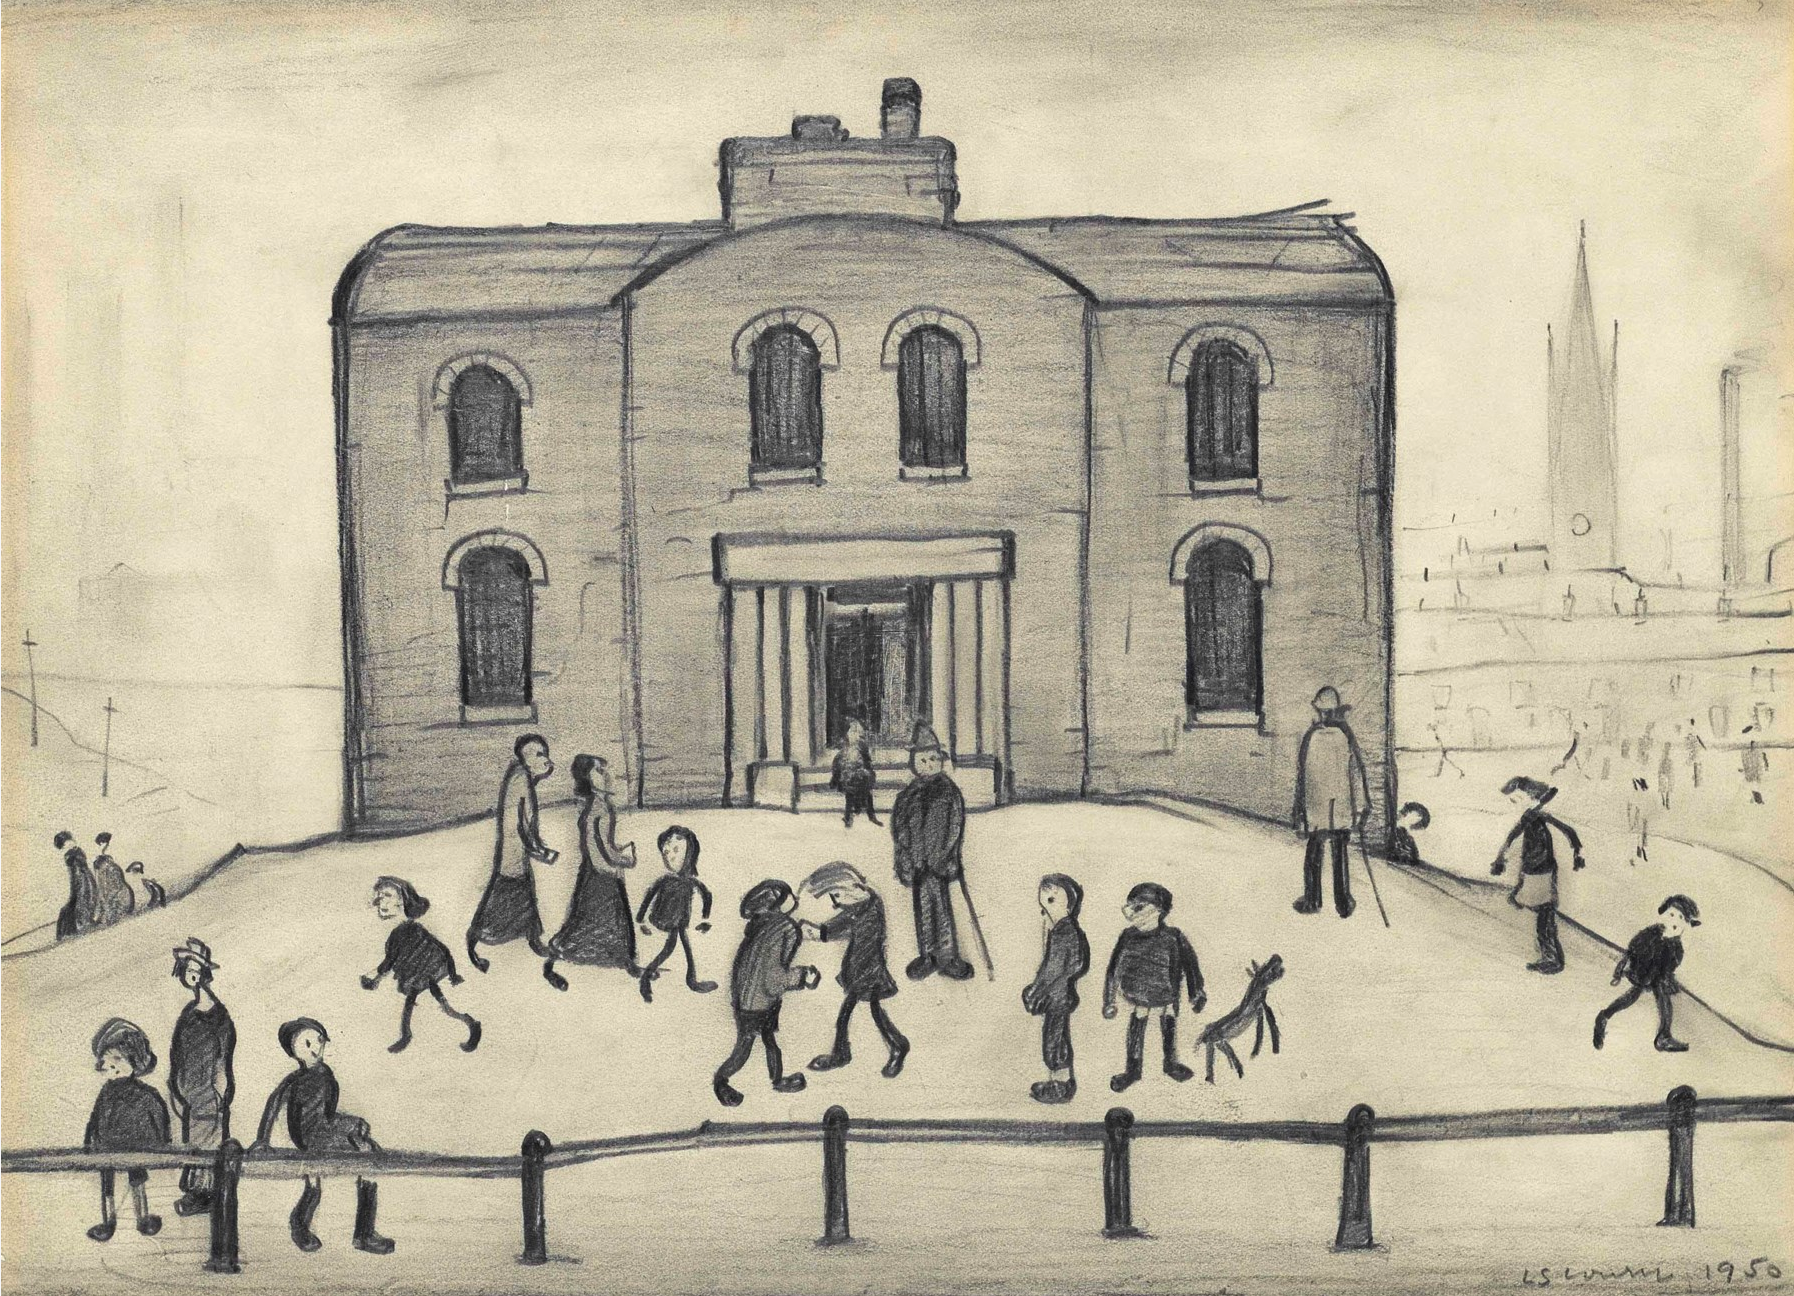 Old house (1950) by Laurence Stephen Lowry (1887 - 1976), English artist.